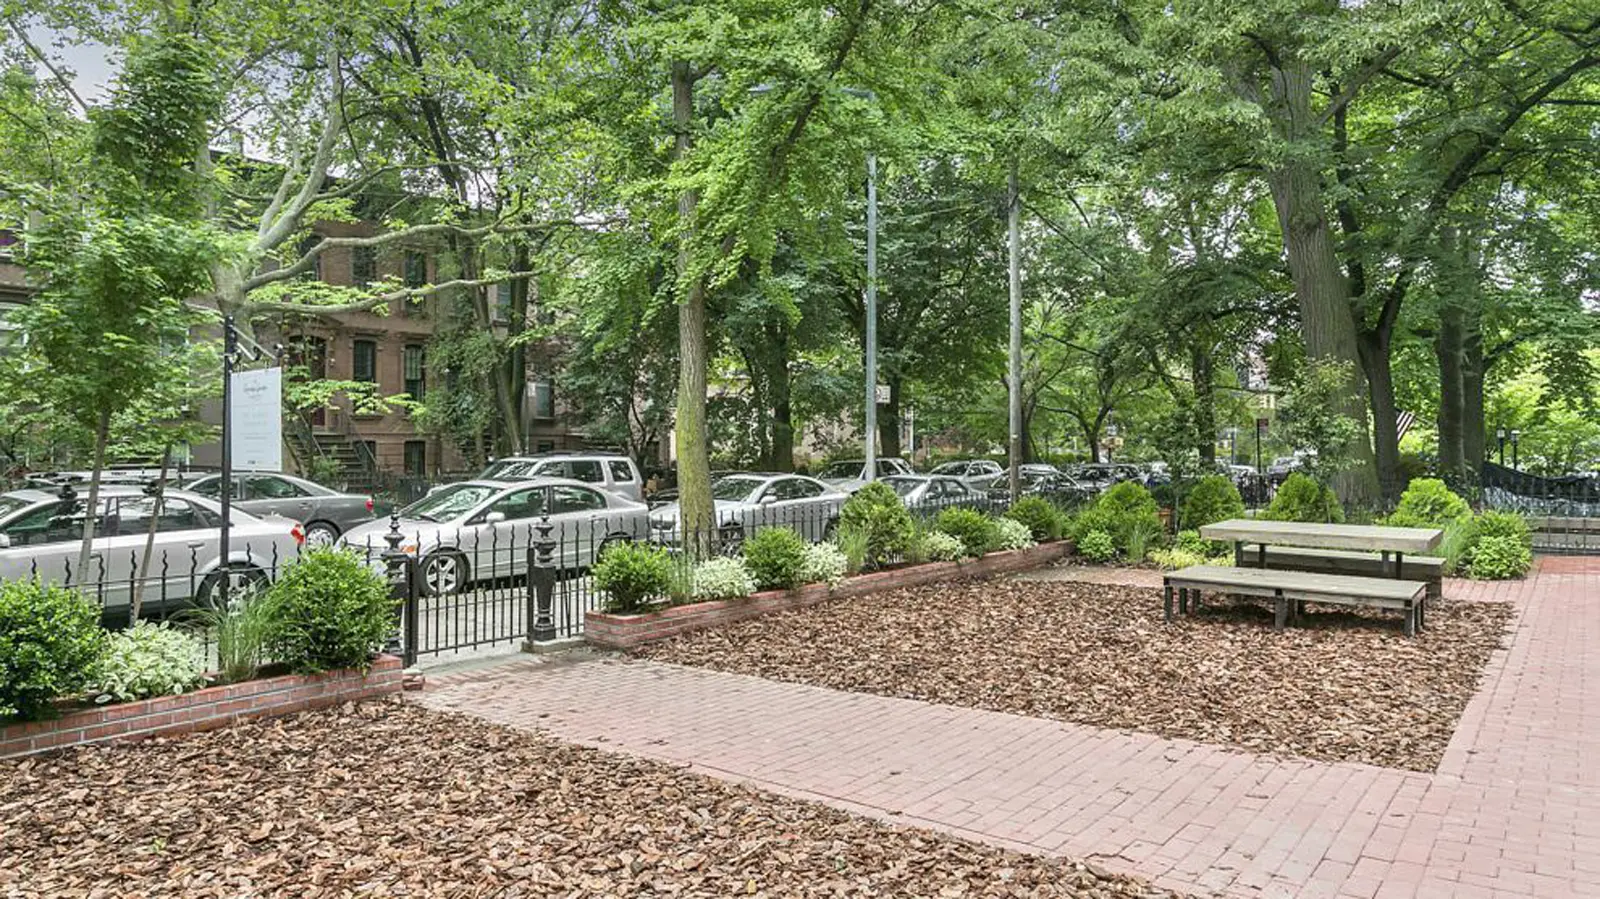 The Brooklyn Garden Houses, 61-65 3rd Place